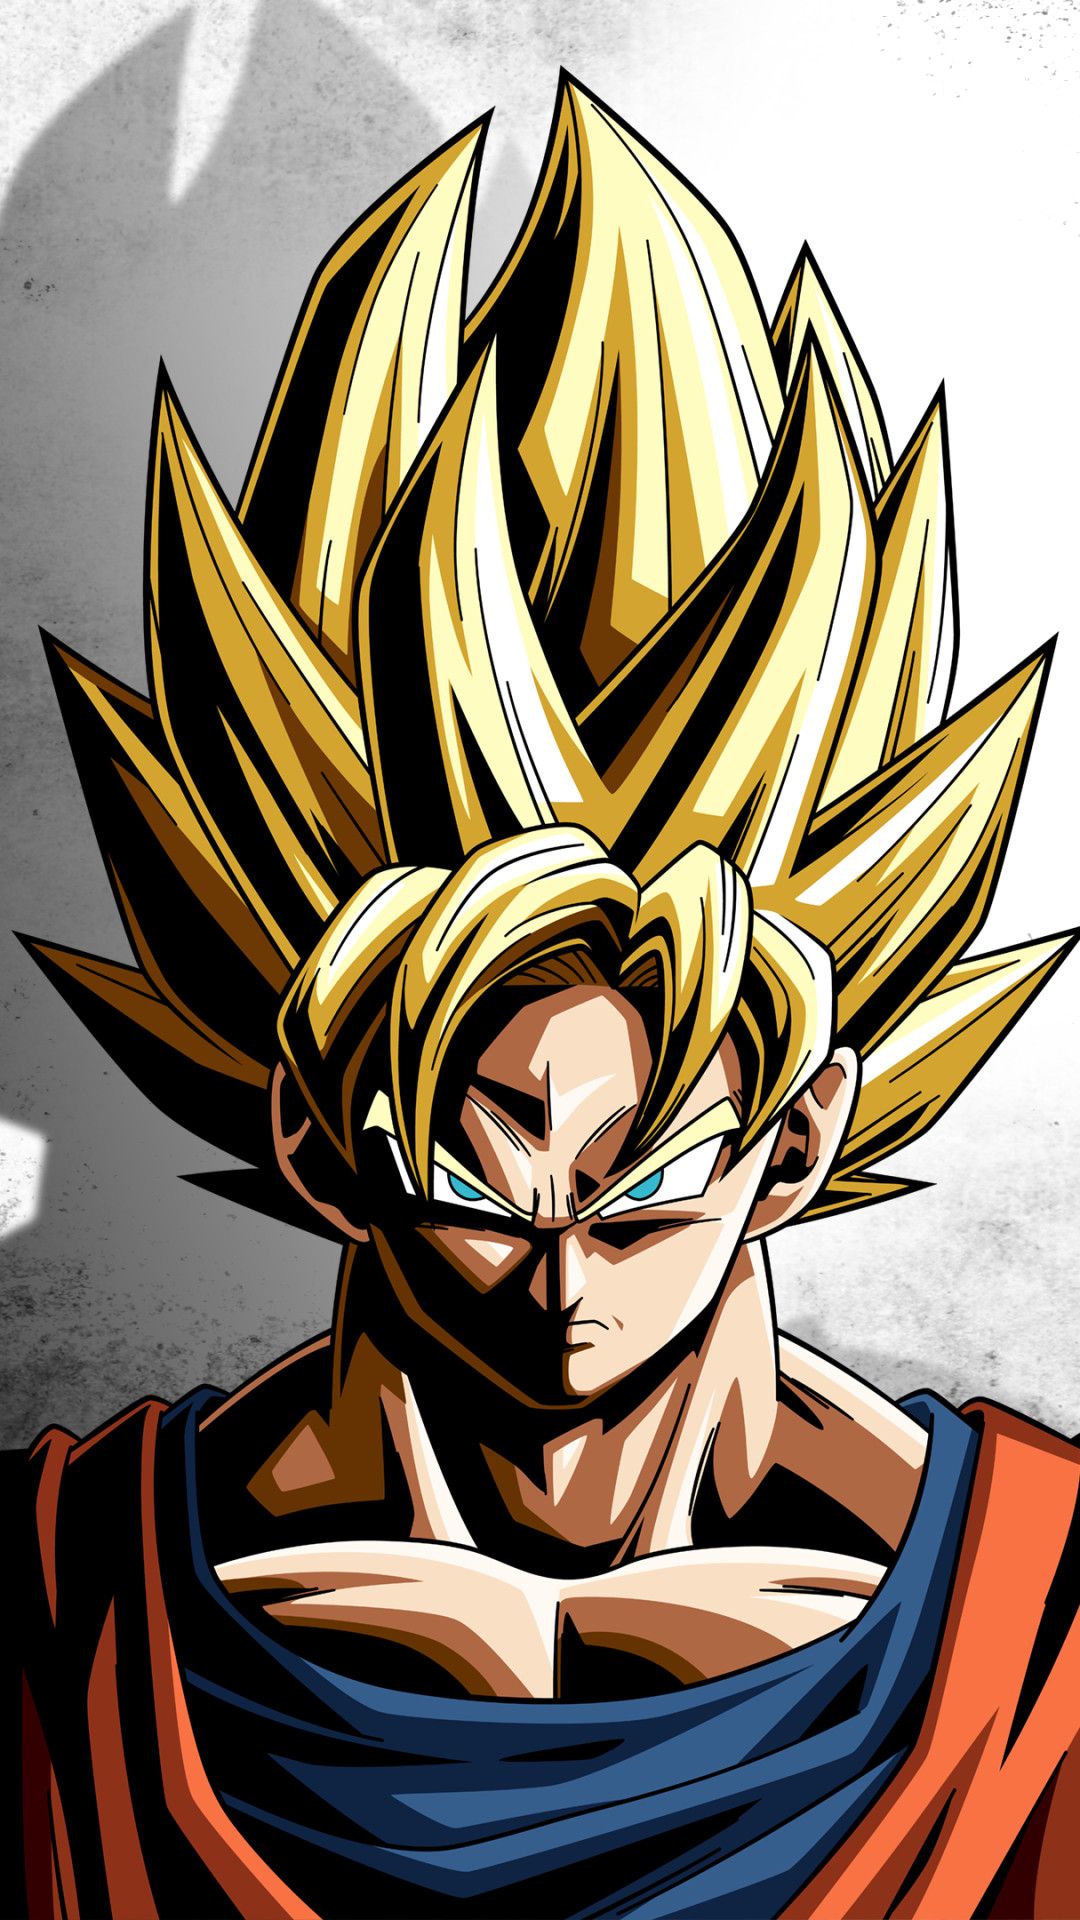 Dragon Ball Z Live Wallpapers on